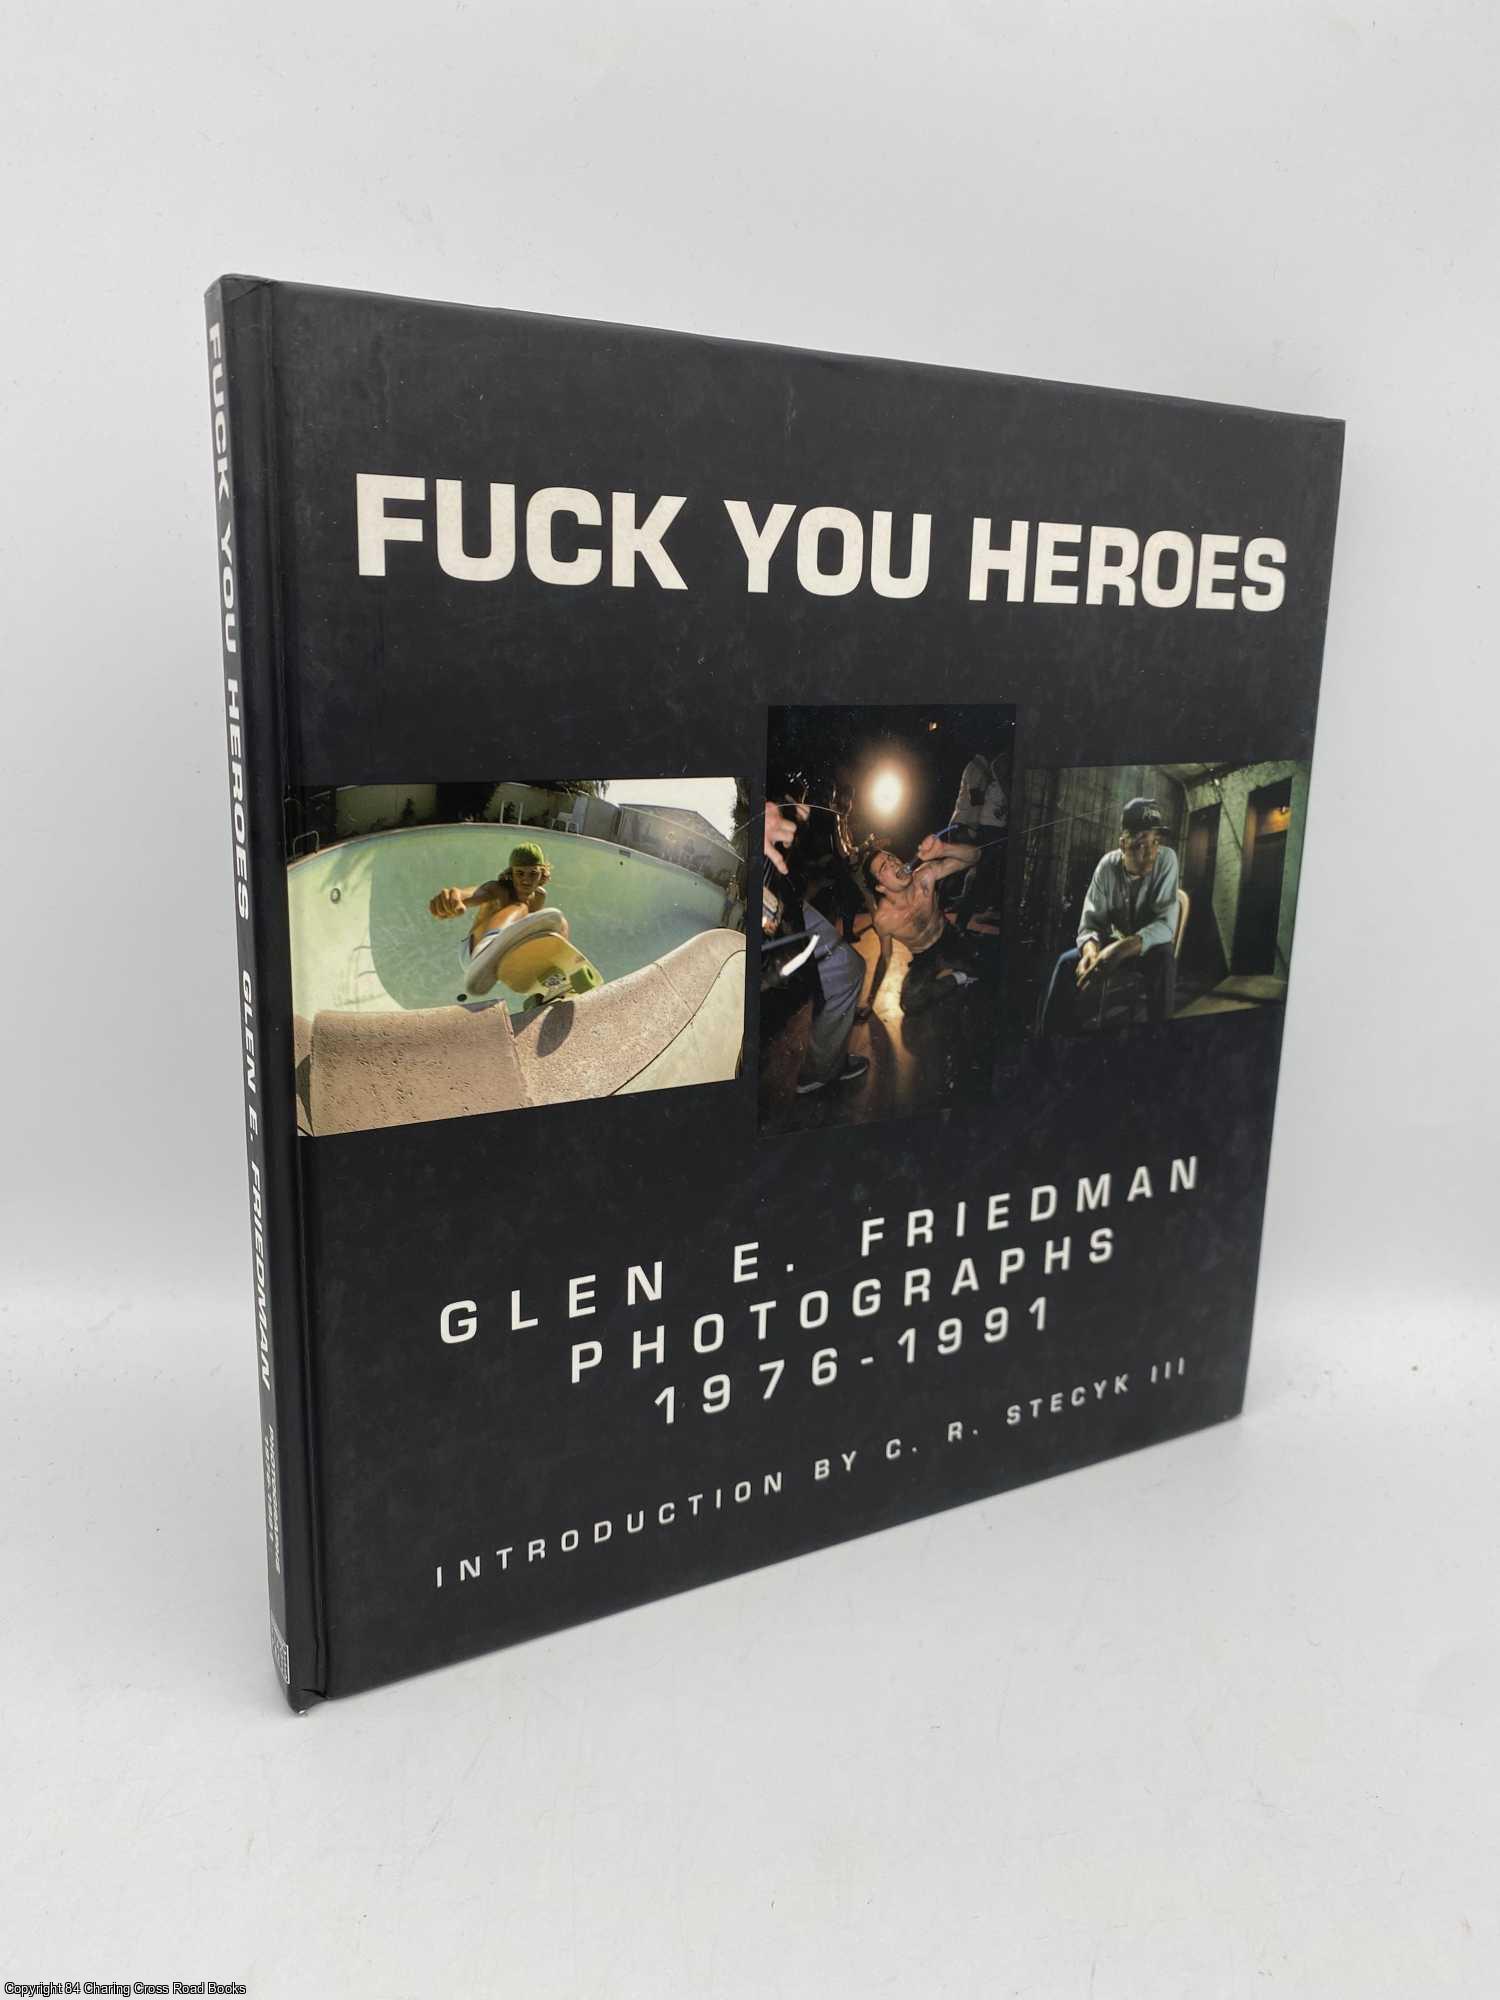 Fuck You Heroes Signed by Glen Friedman on 84 Charing Cross Rare Books